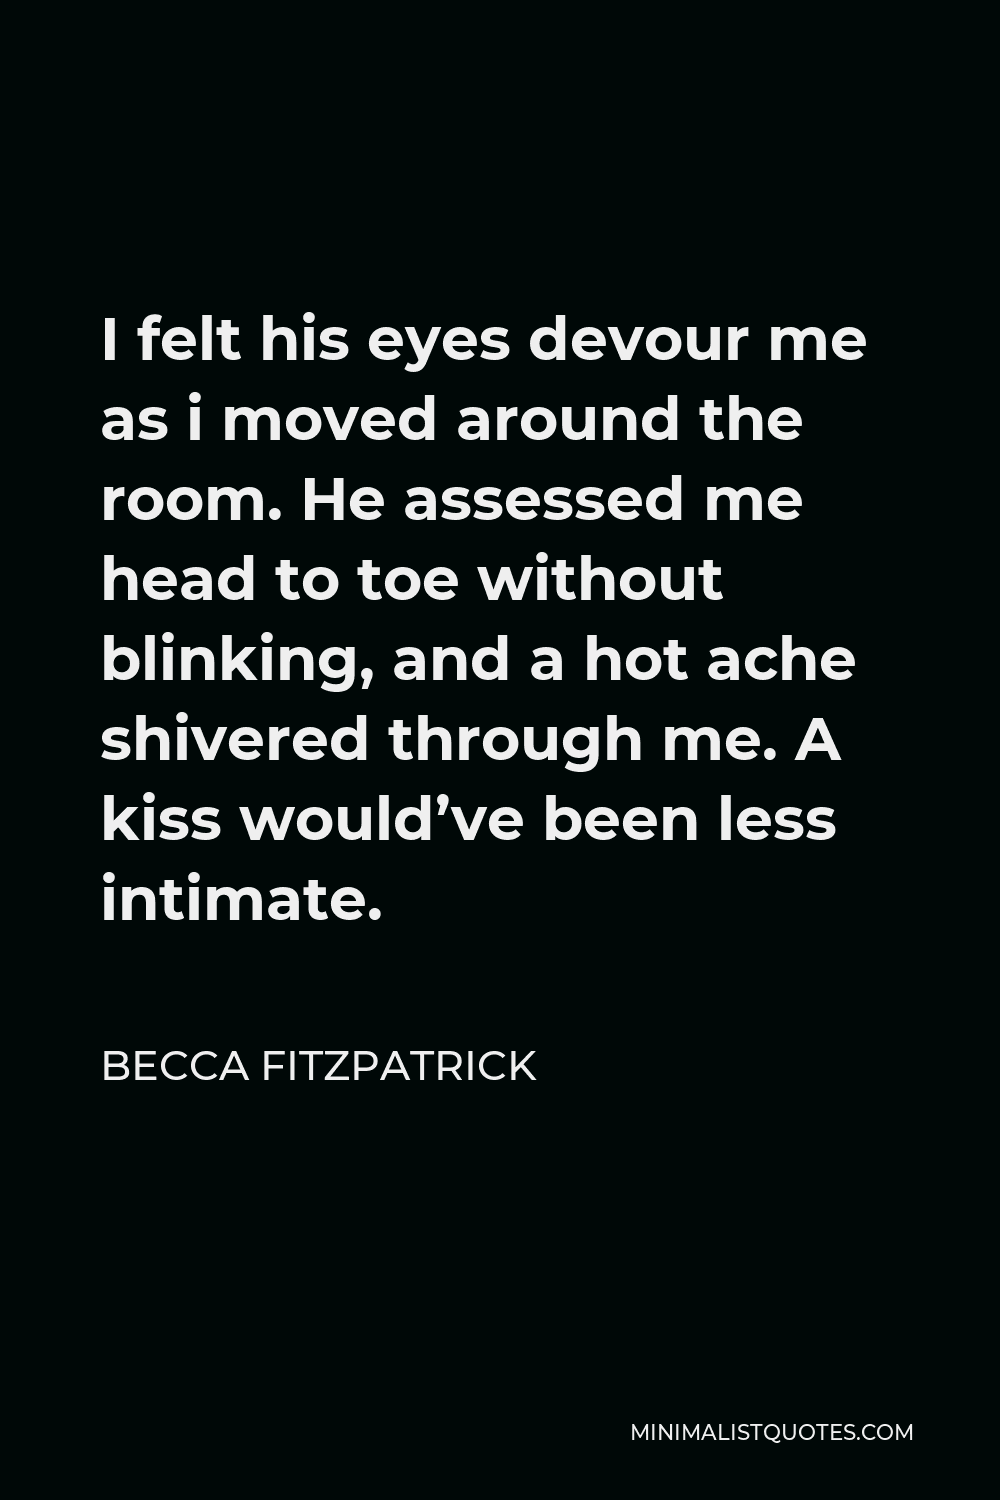 Becca Fitzpatrick Quote - I felt his eyes devour me as i moved around the room. He assessed me head to toe without blinking, and a hot ache shivered through me. A kiss would’ve been less intimate.